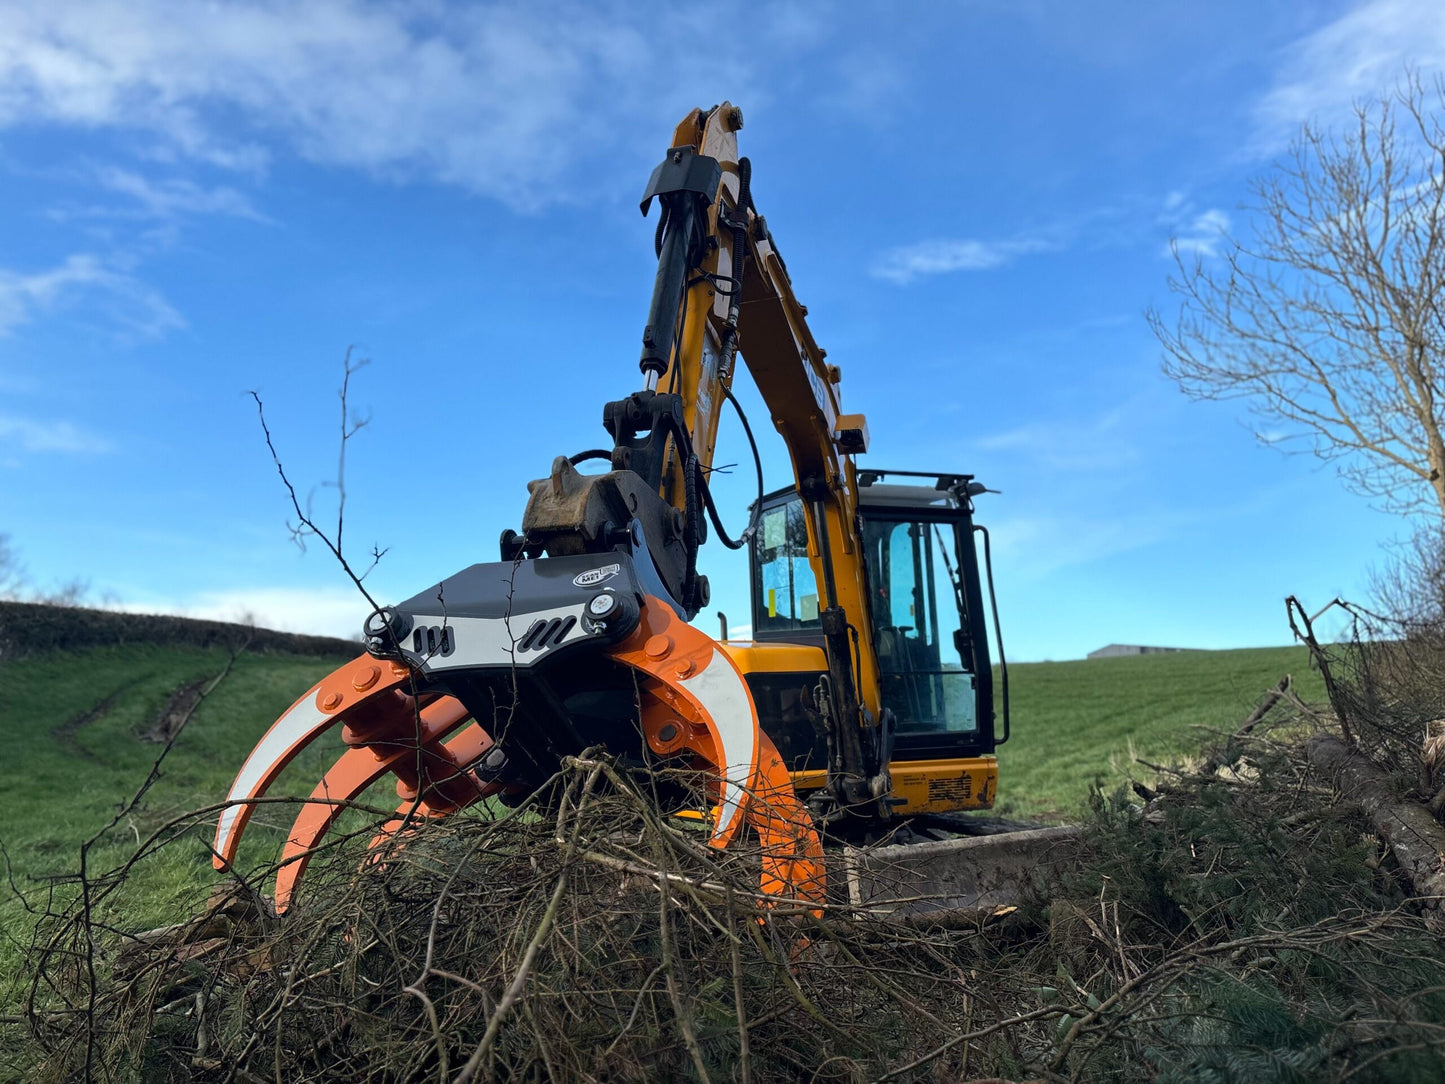 MDE MACHINERY 27.55" TO 43.33" LOG & DEBRIS GRAPPLE FIXED POSITION EXCAVATOR FOR EXCAVATOR